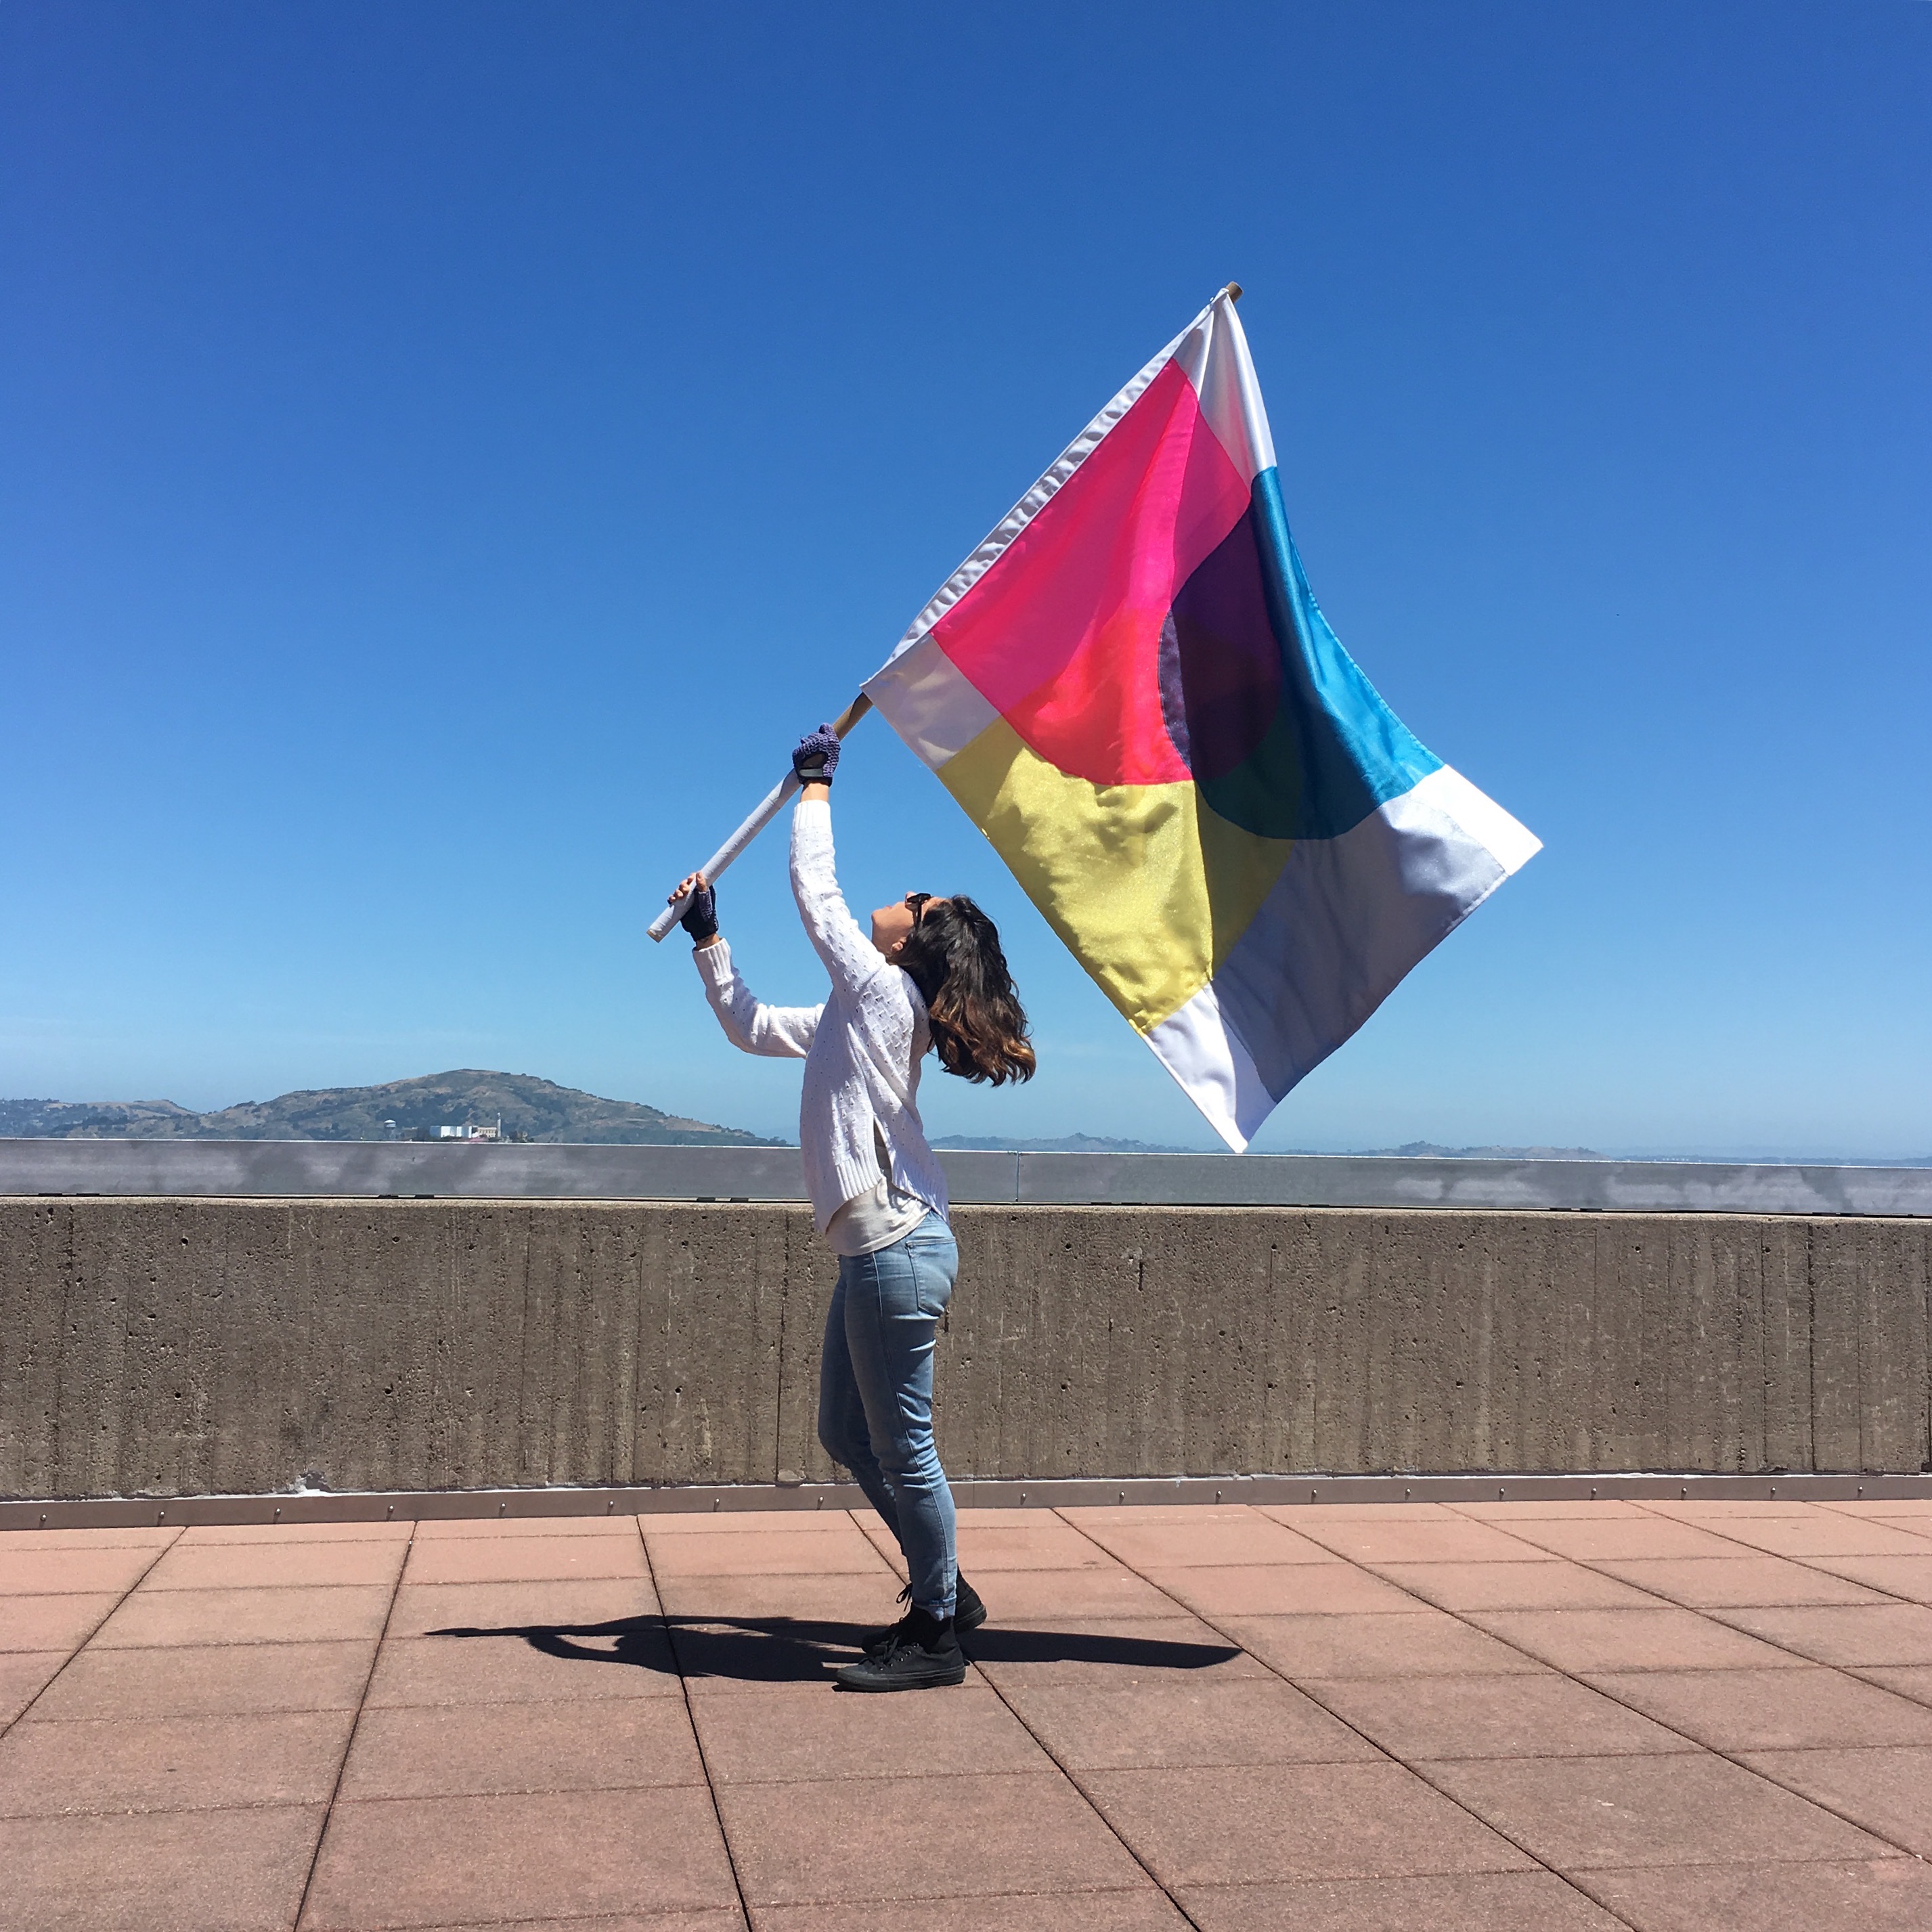 exhibition image: Cristina flying her 100 days flag in a cloudless sky